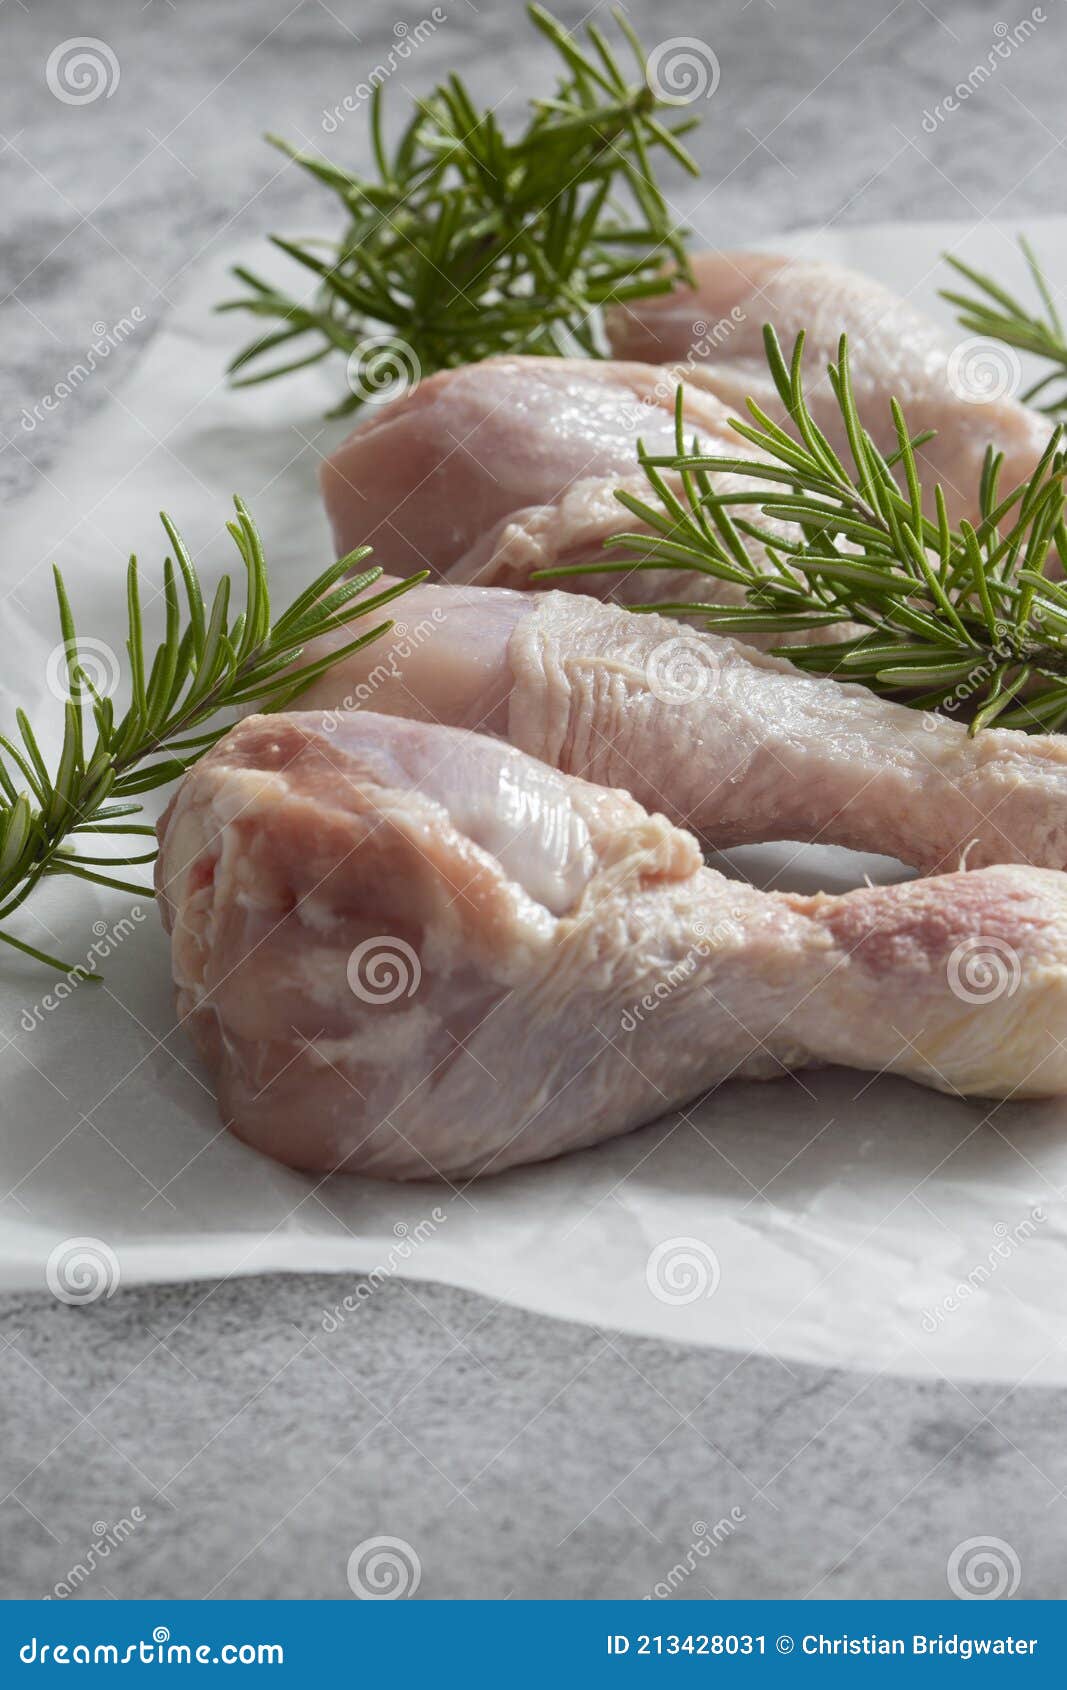 raw chicken drumsticks with rosemary on greaseproof paper.